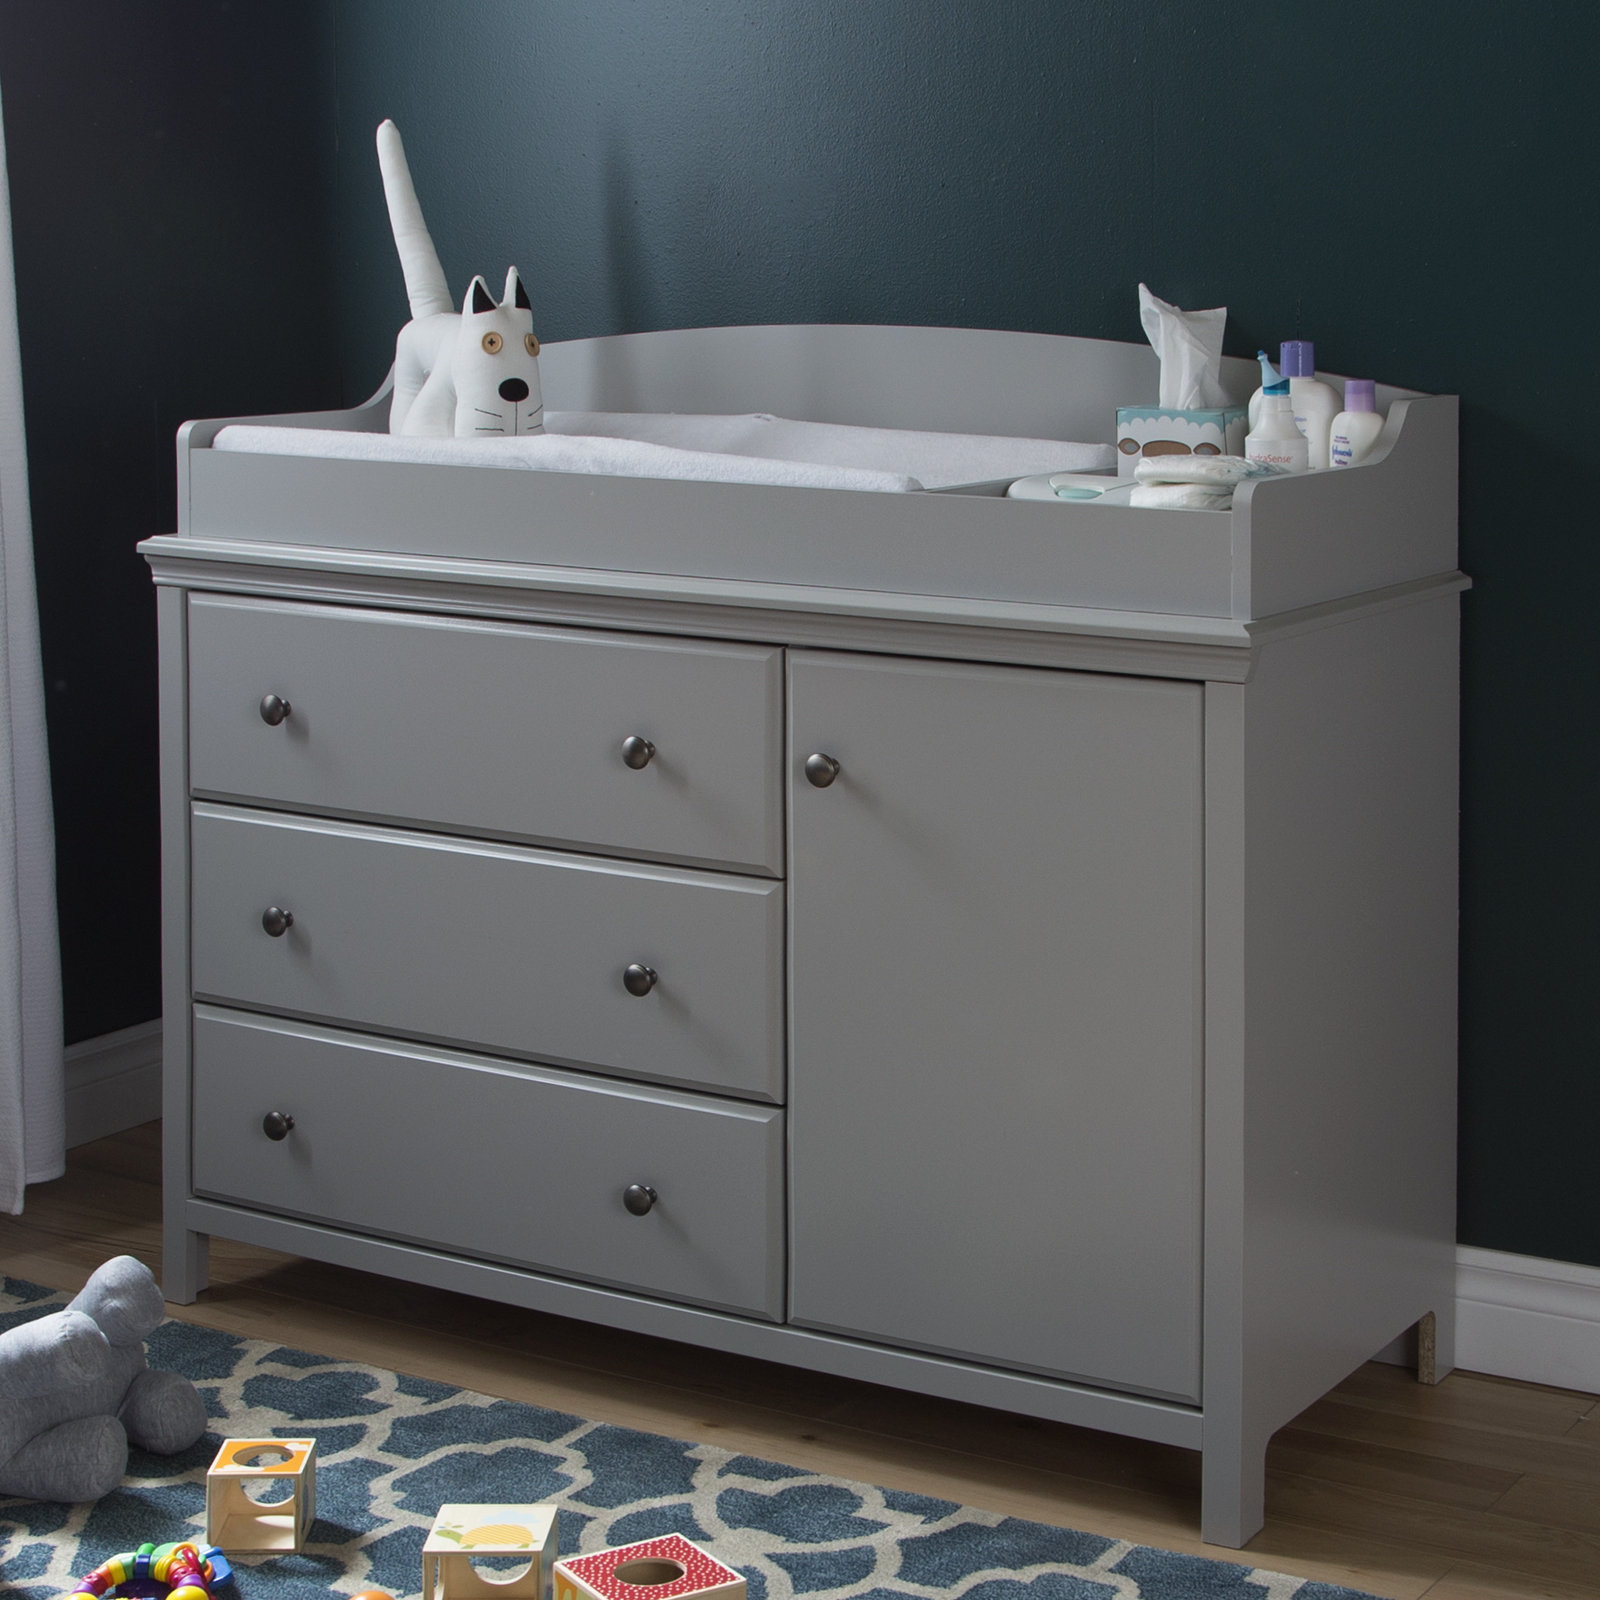 Wayfair | Changing Tables You'll Love 